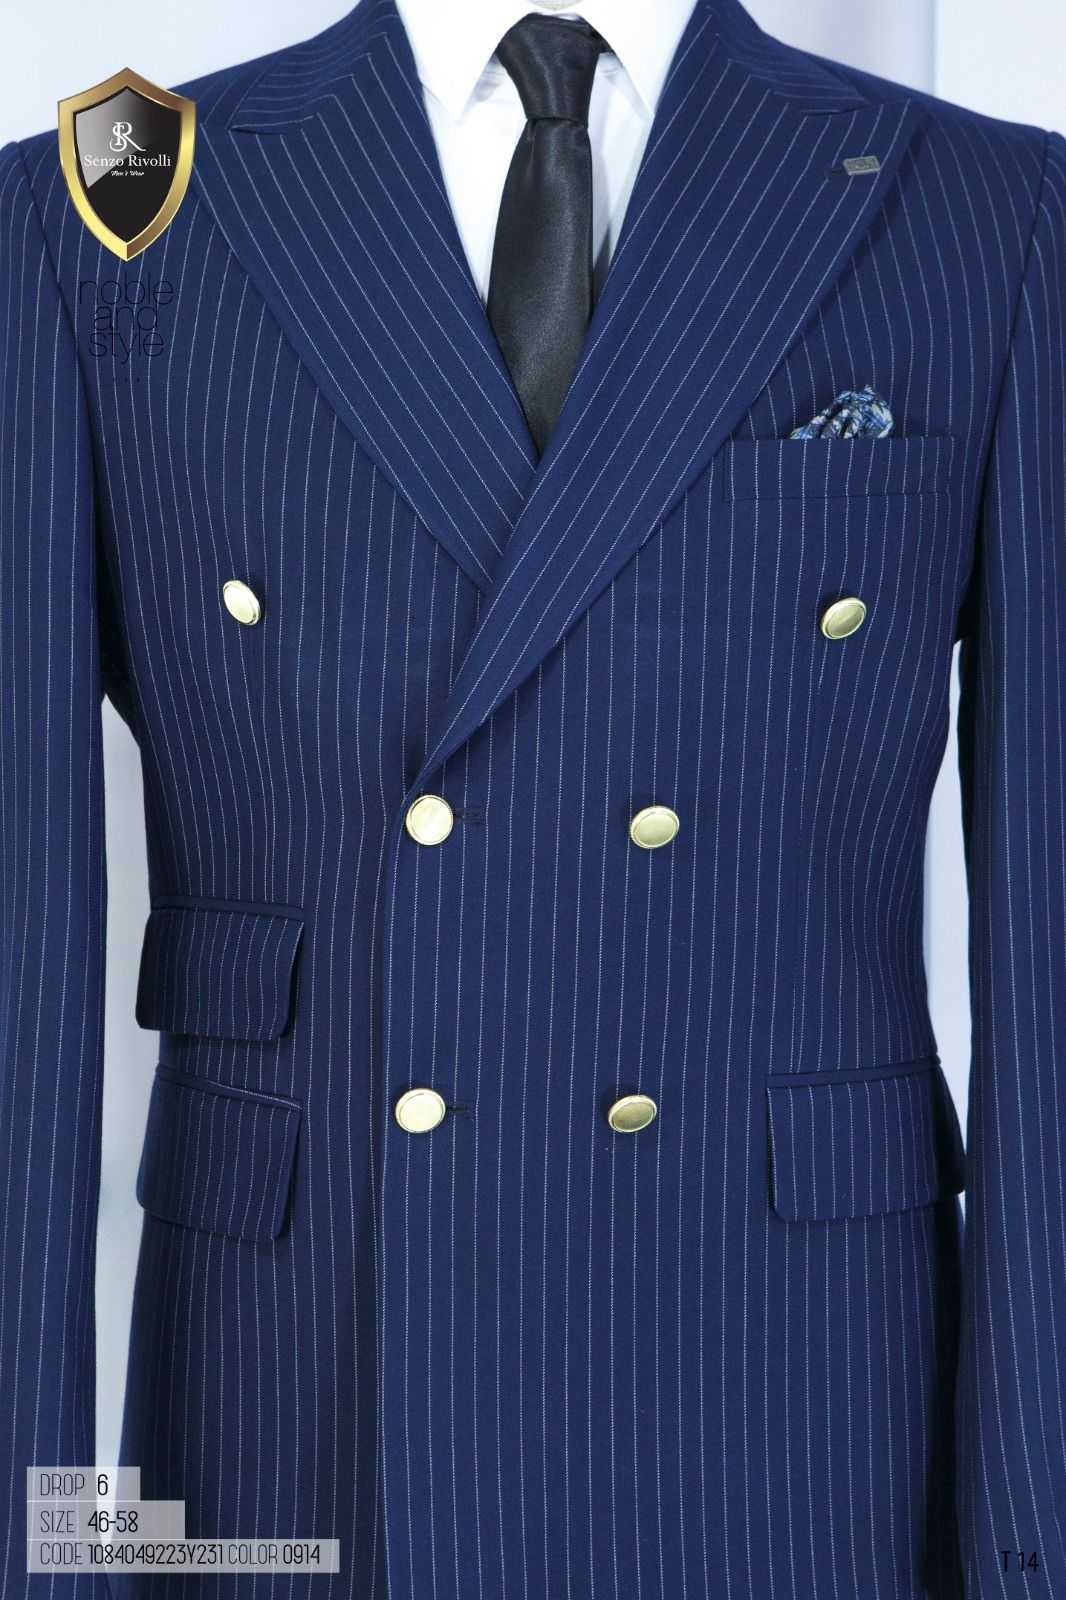 EXECUTIVE NAVY BLUE STRIPPED BREASTED TURKEY SUIT WITH GOLDEN BUTTON-deluxe.com.ng